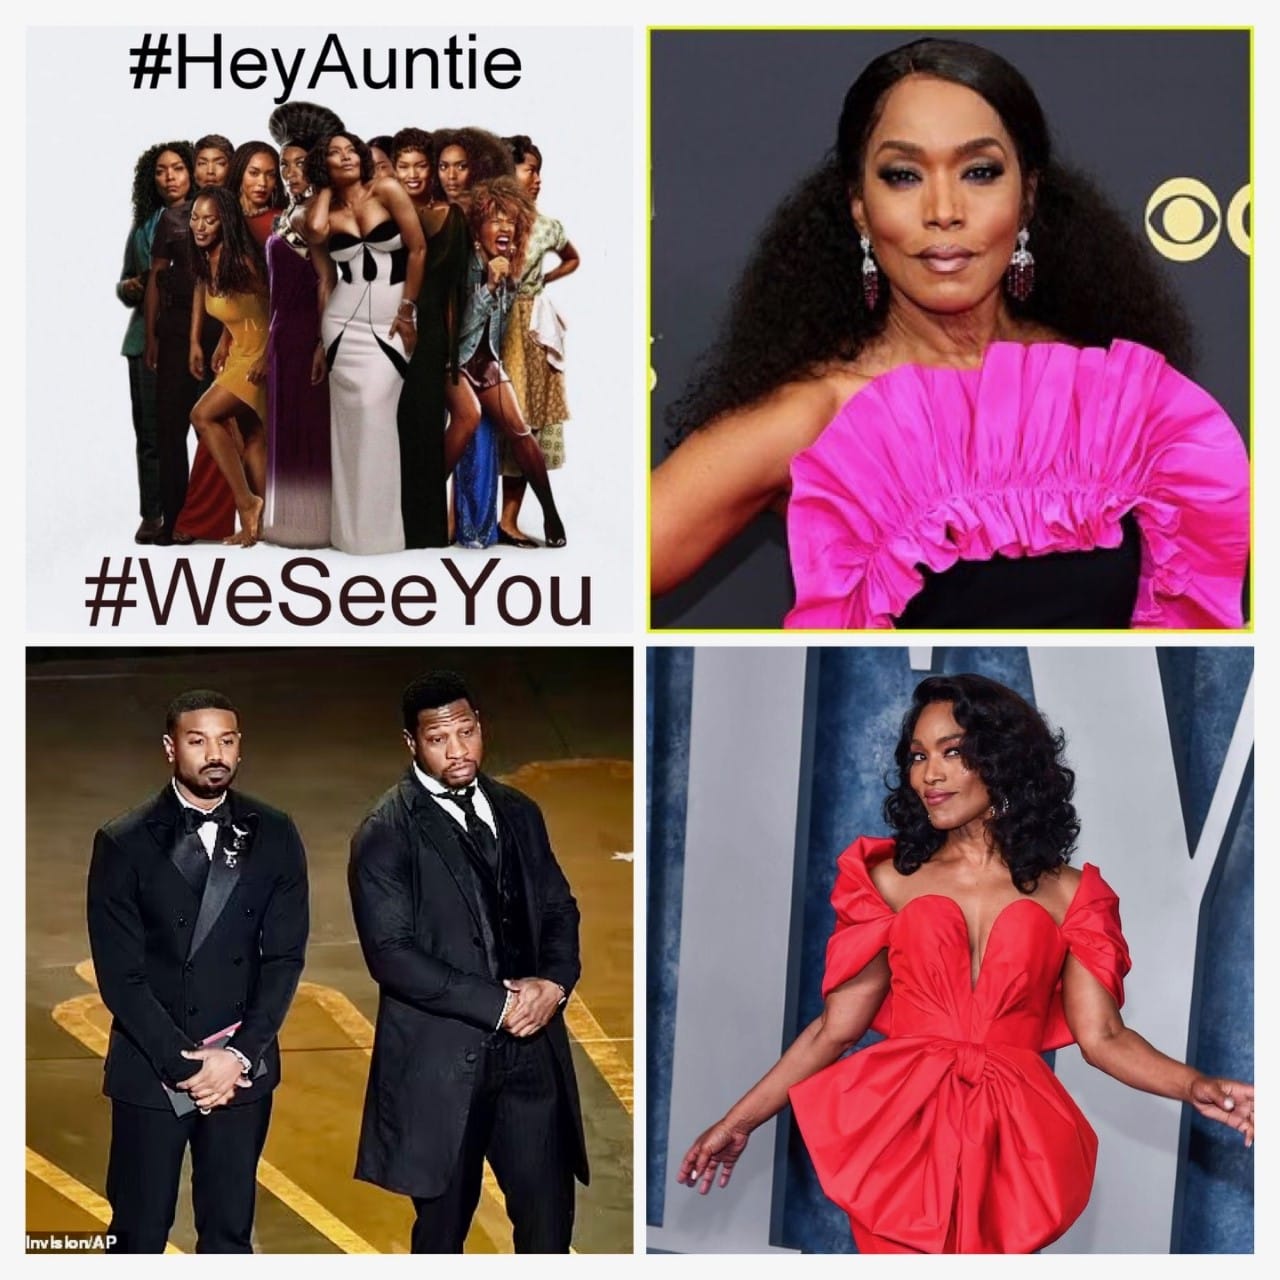 A COMPILATION OF photos of Angela Bassett, in person and in various movie roles, courtesy of Twitter. Michael B. Jordan and Jonathan Majors gave a shoutout to Bassett during the recent Academy Awards presentations.